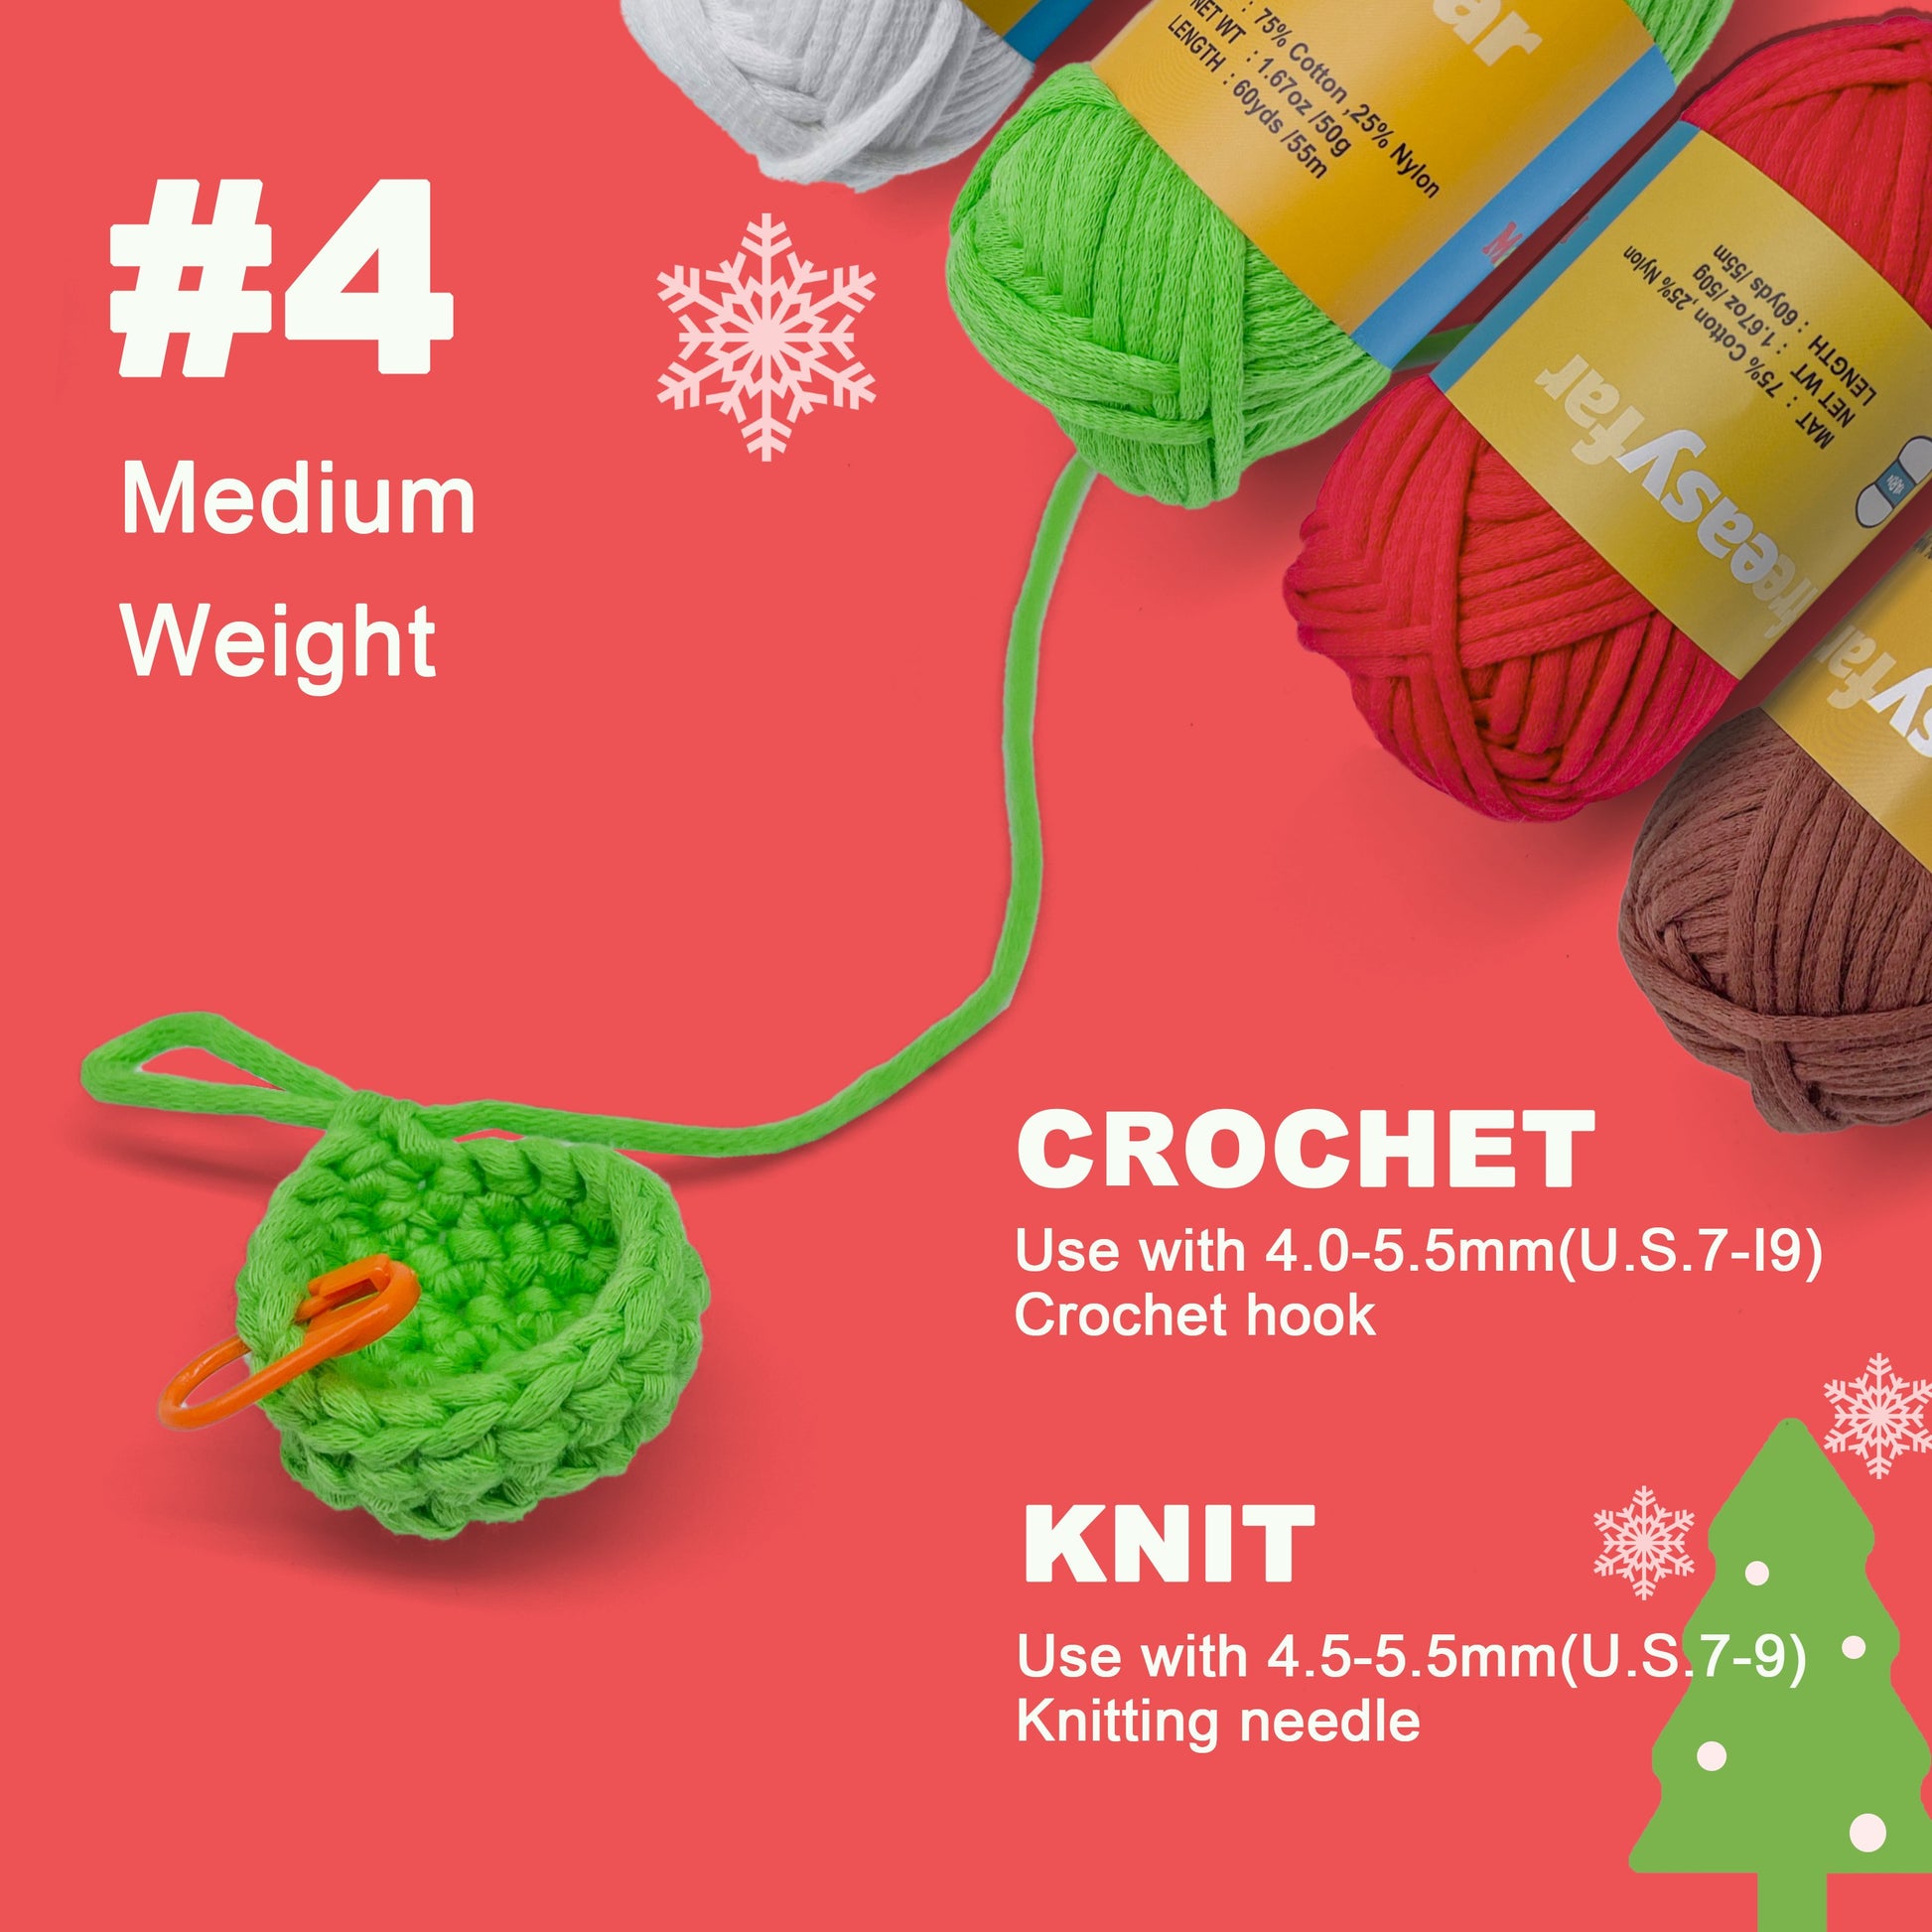 Orange Yarn for Crocheting and Knitting Cotton Crochet Knitting Yarn for  Beginners with Easy-to-See Stitches Cotton-Nylon Blend Easy Yarn for